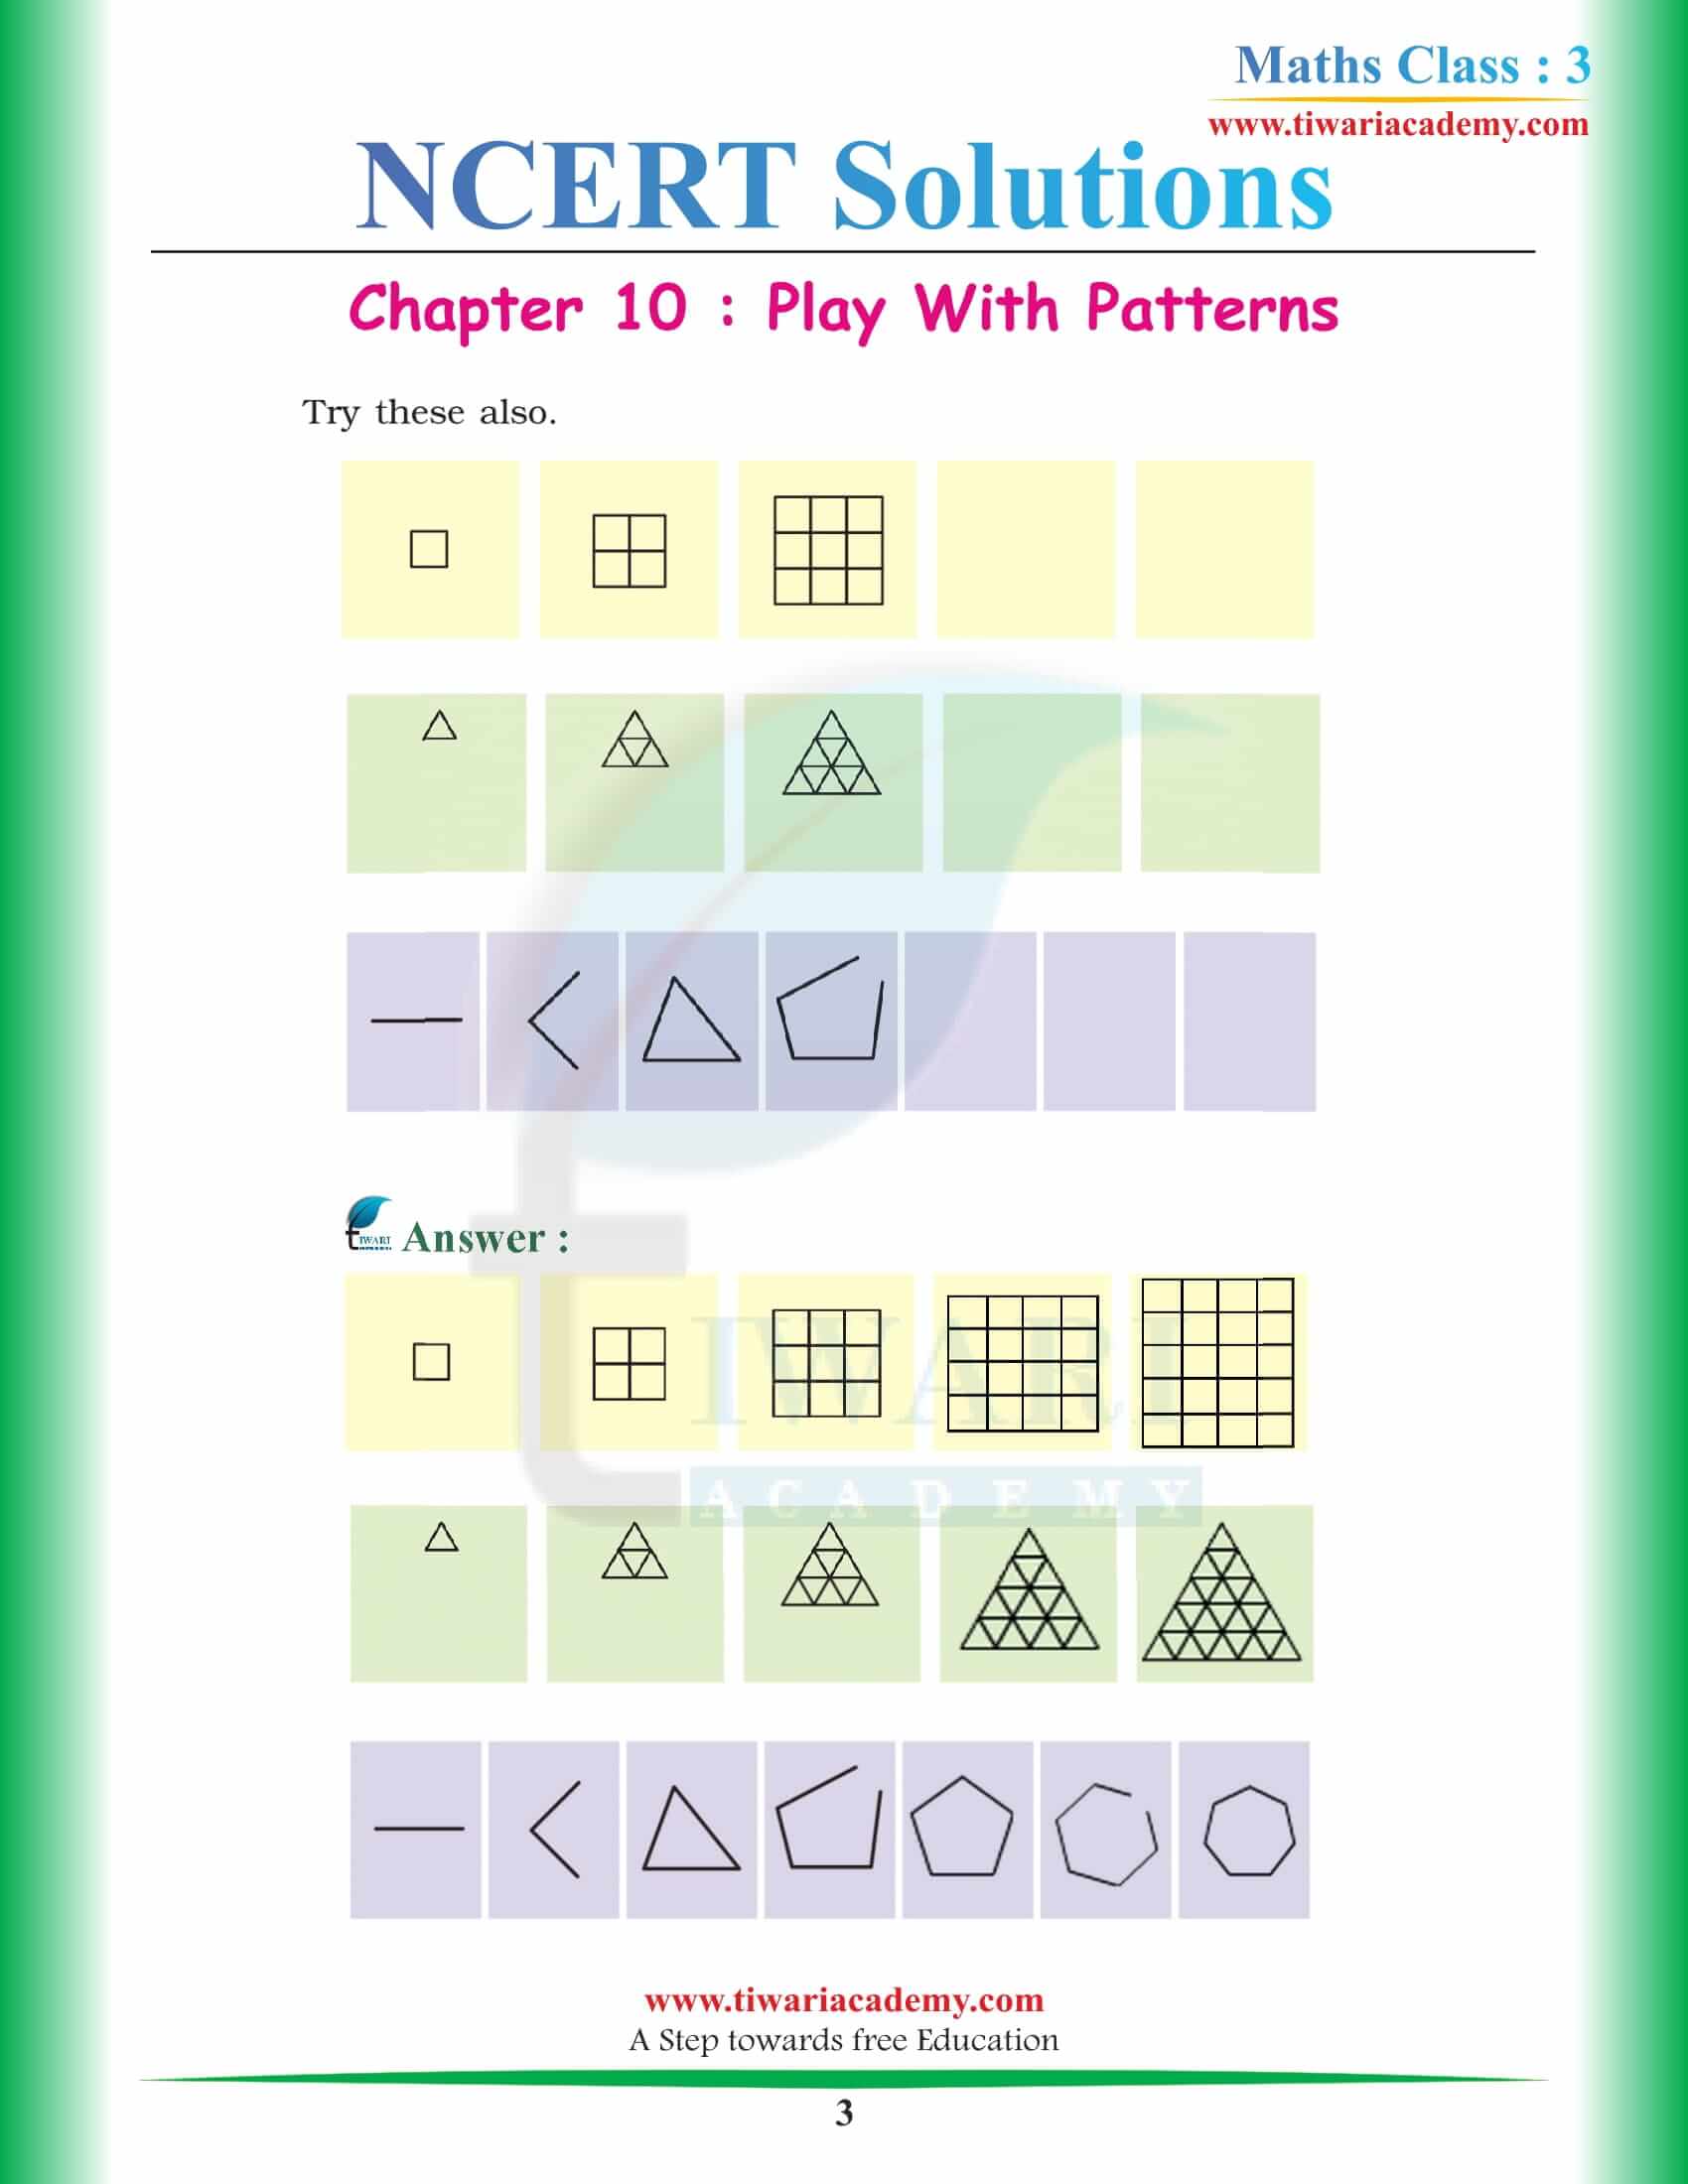 NCERT Solutions for Class 3 Maths Chapter 10 in PDF